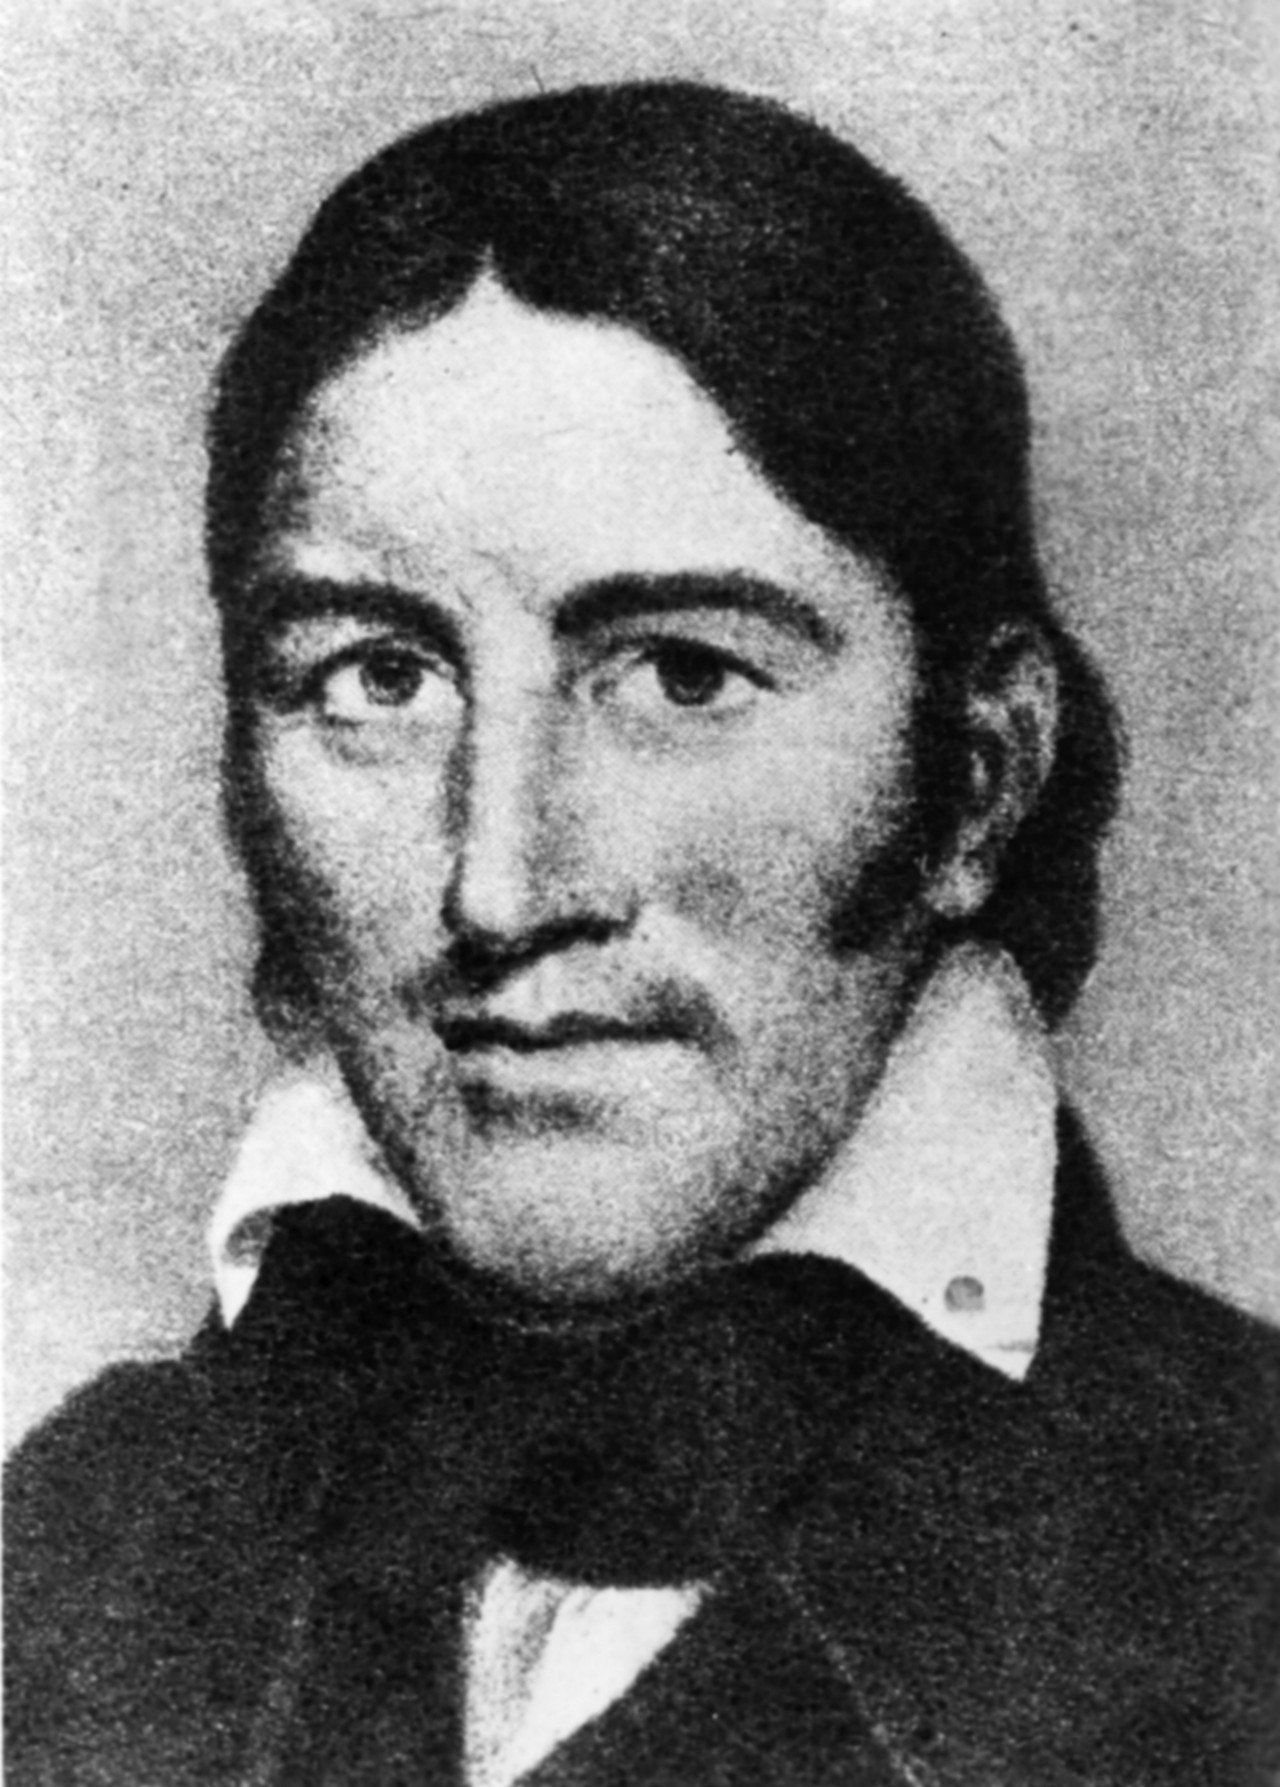 Davy Crockett
The famous father of the phrase, “You may all go to hell and I will go to Texas,” interestingly enough, wasn’t even born in Texas. He served a Congressional seat in Tennessee, and, when he wasn’t re-elected to his post, proclaimed this famous phrase, and did exactly that. The roughin’ toughin’ wild frontiersman died in the Battle of the Alamo and is buried at San Fernando Cathedral, right here in San Antonio. 
Photo via Shutterstock